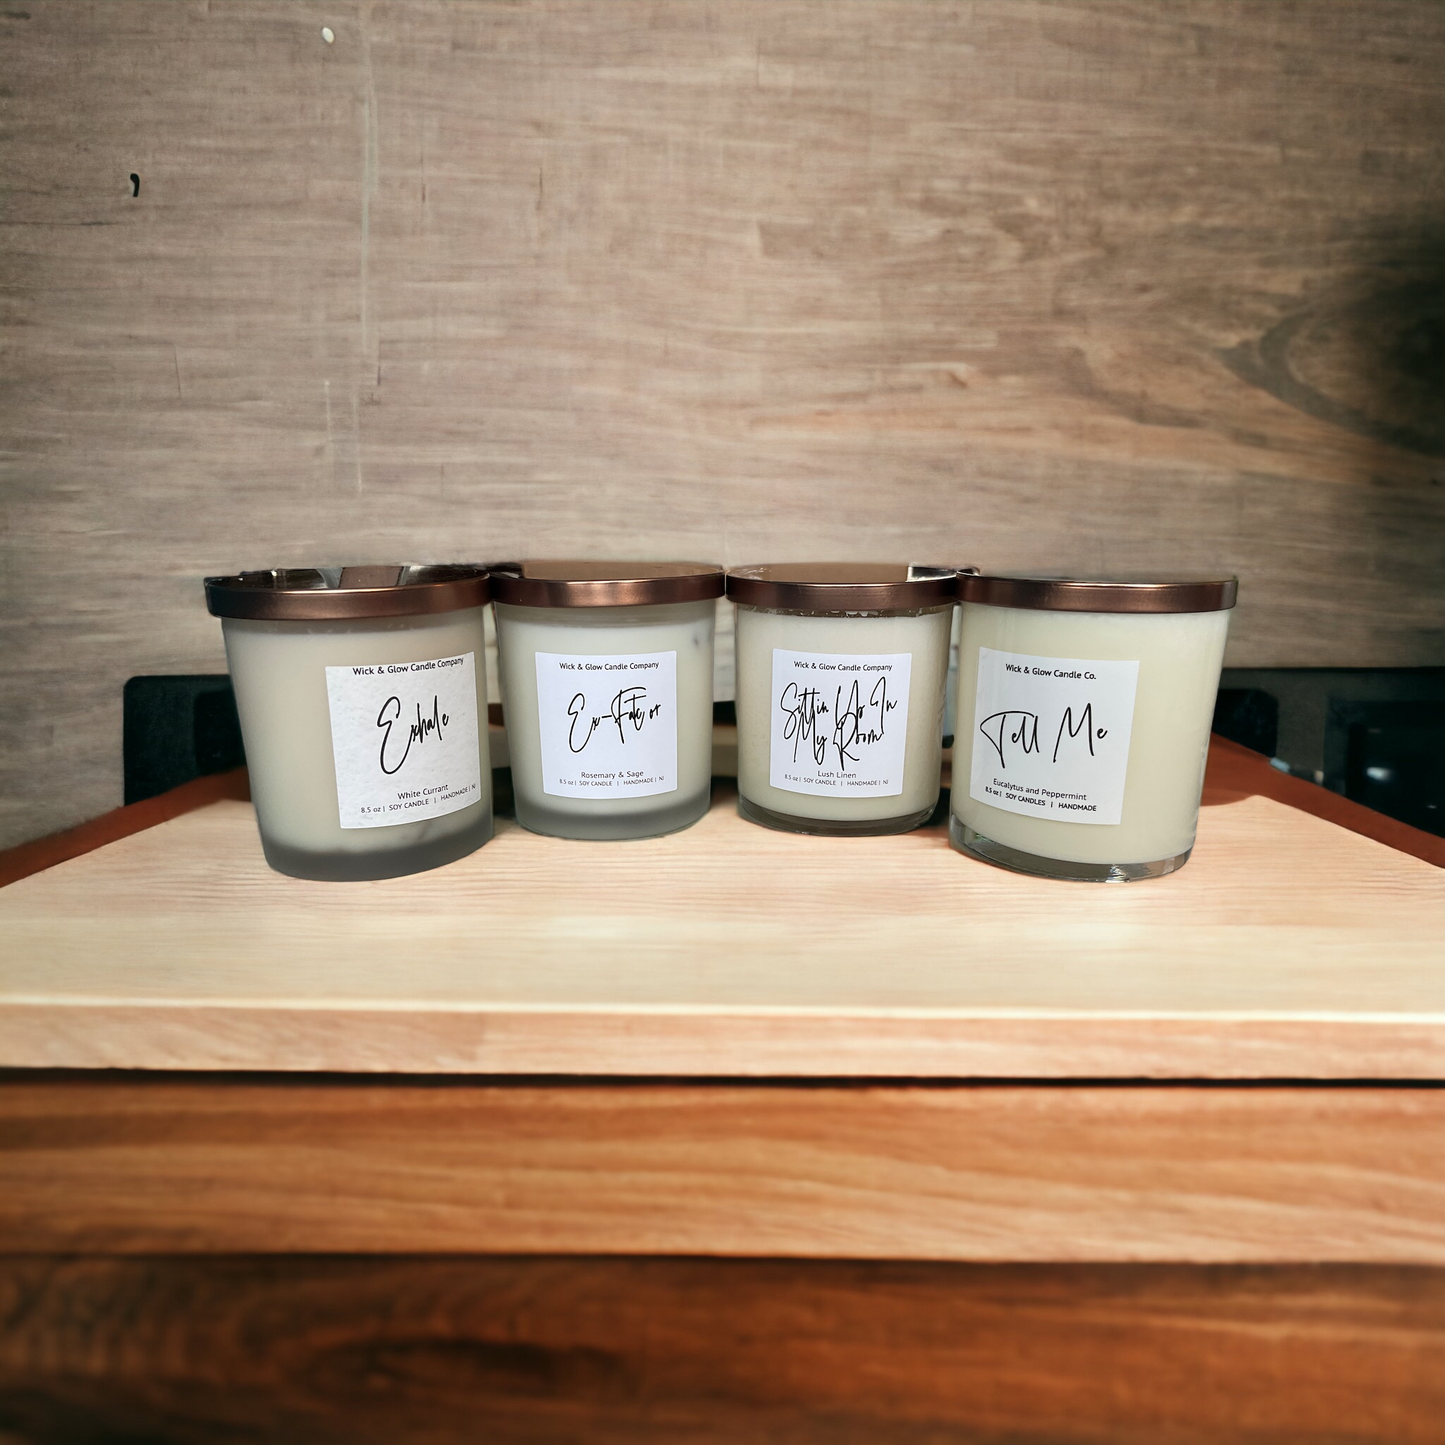 4 candles in white jars with bronze lids on a wood surface